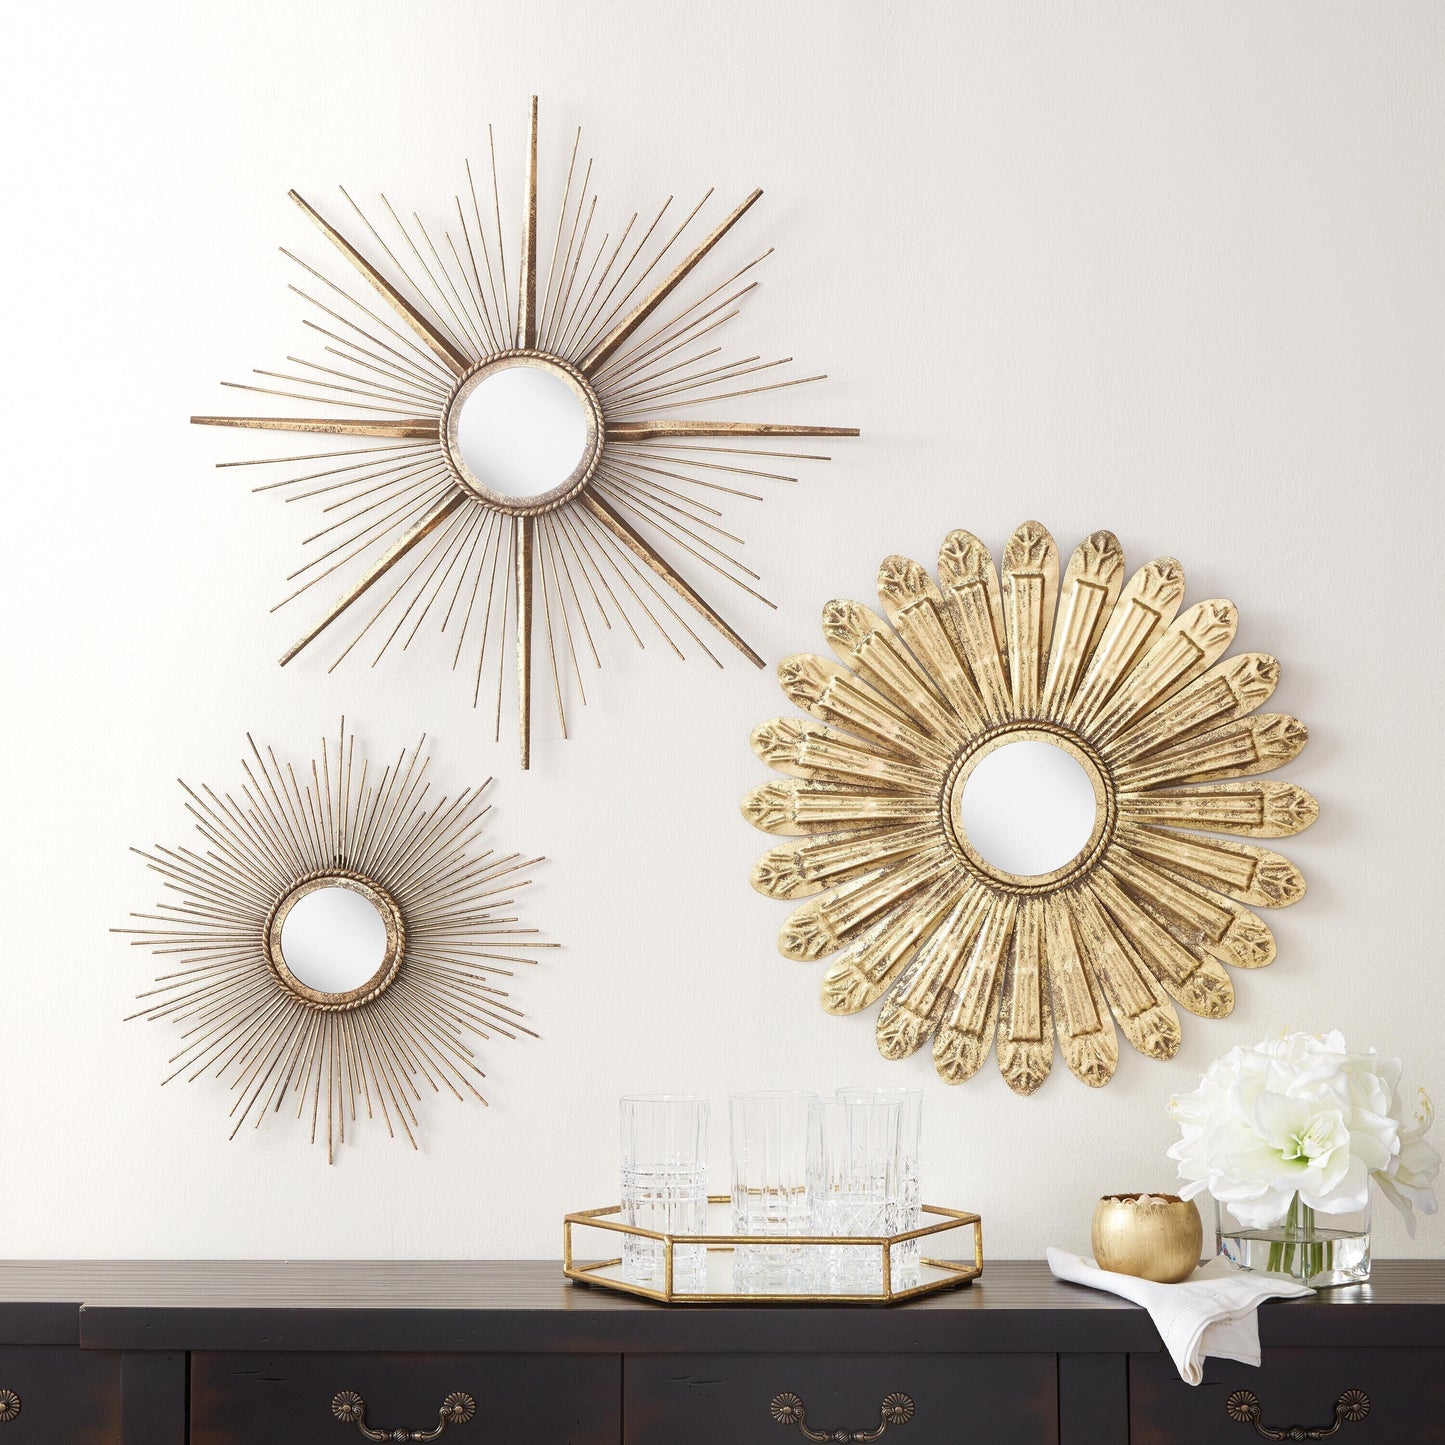 Sunburst Metal Wall Mirror Set of 3, Wall Mirrors for Room Decor & Home Dcor, Mirrors Sets Wall Dcor, Decorative Wall Mirrors Collection